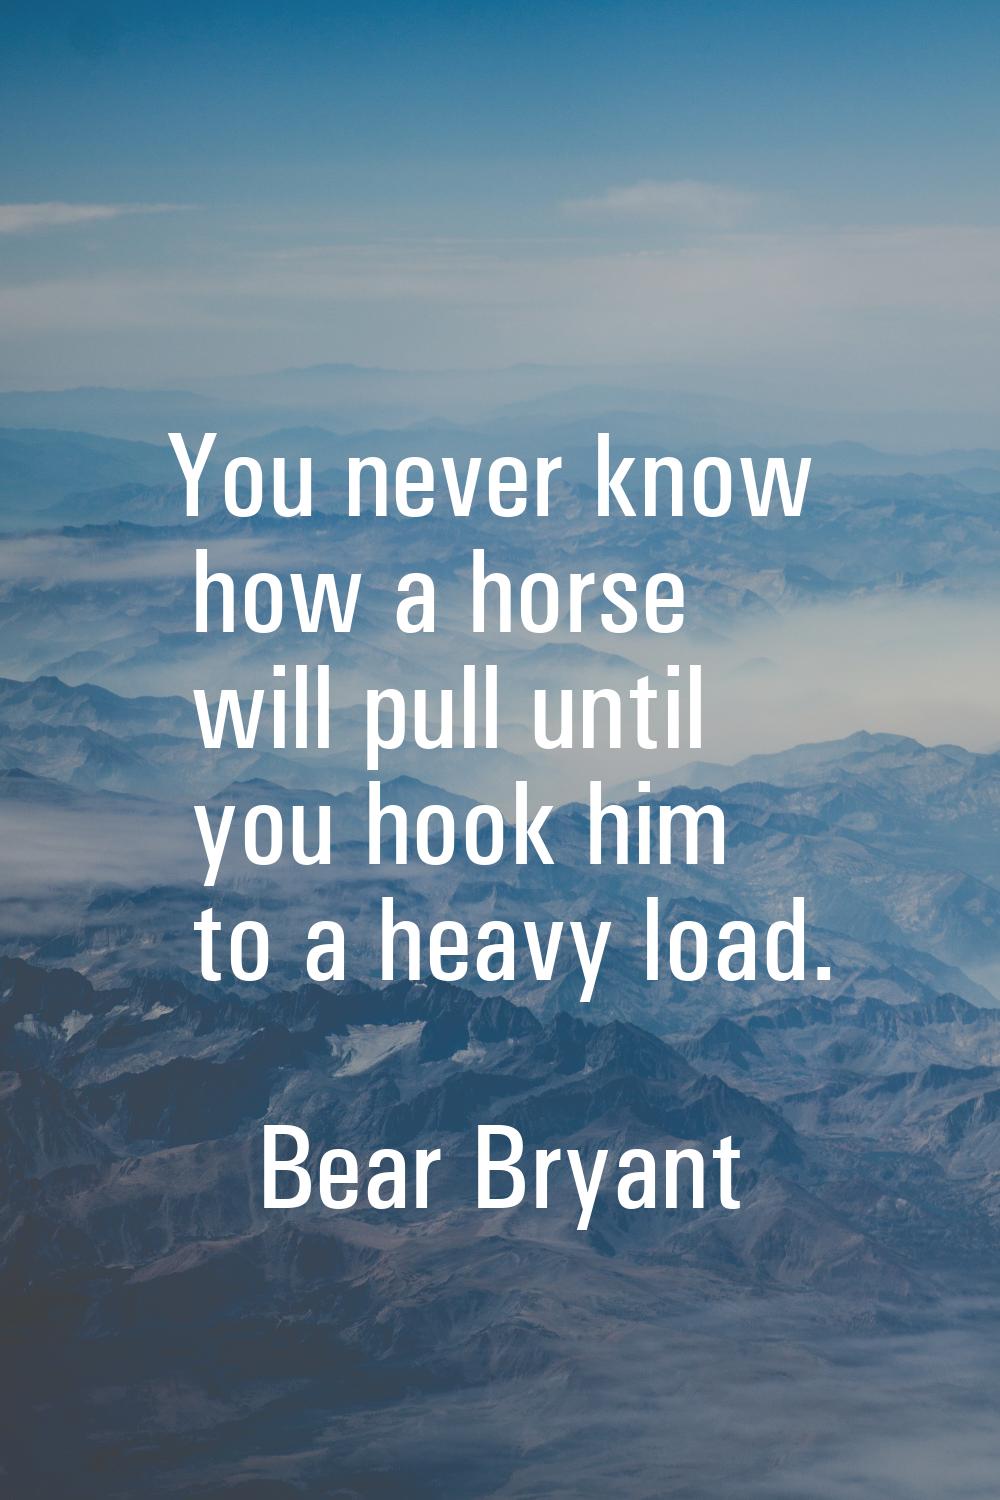 You never know how a horse will pull until you hook him to a heavy load.